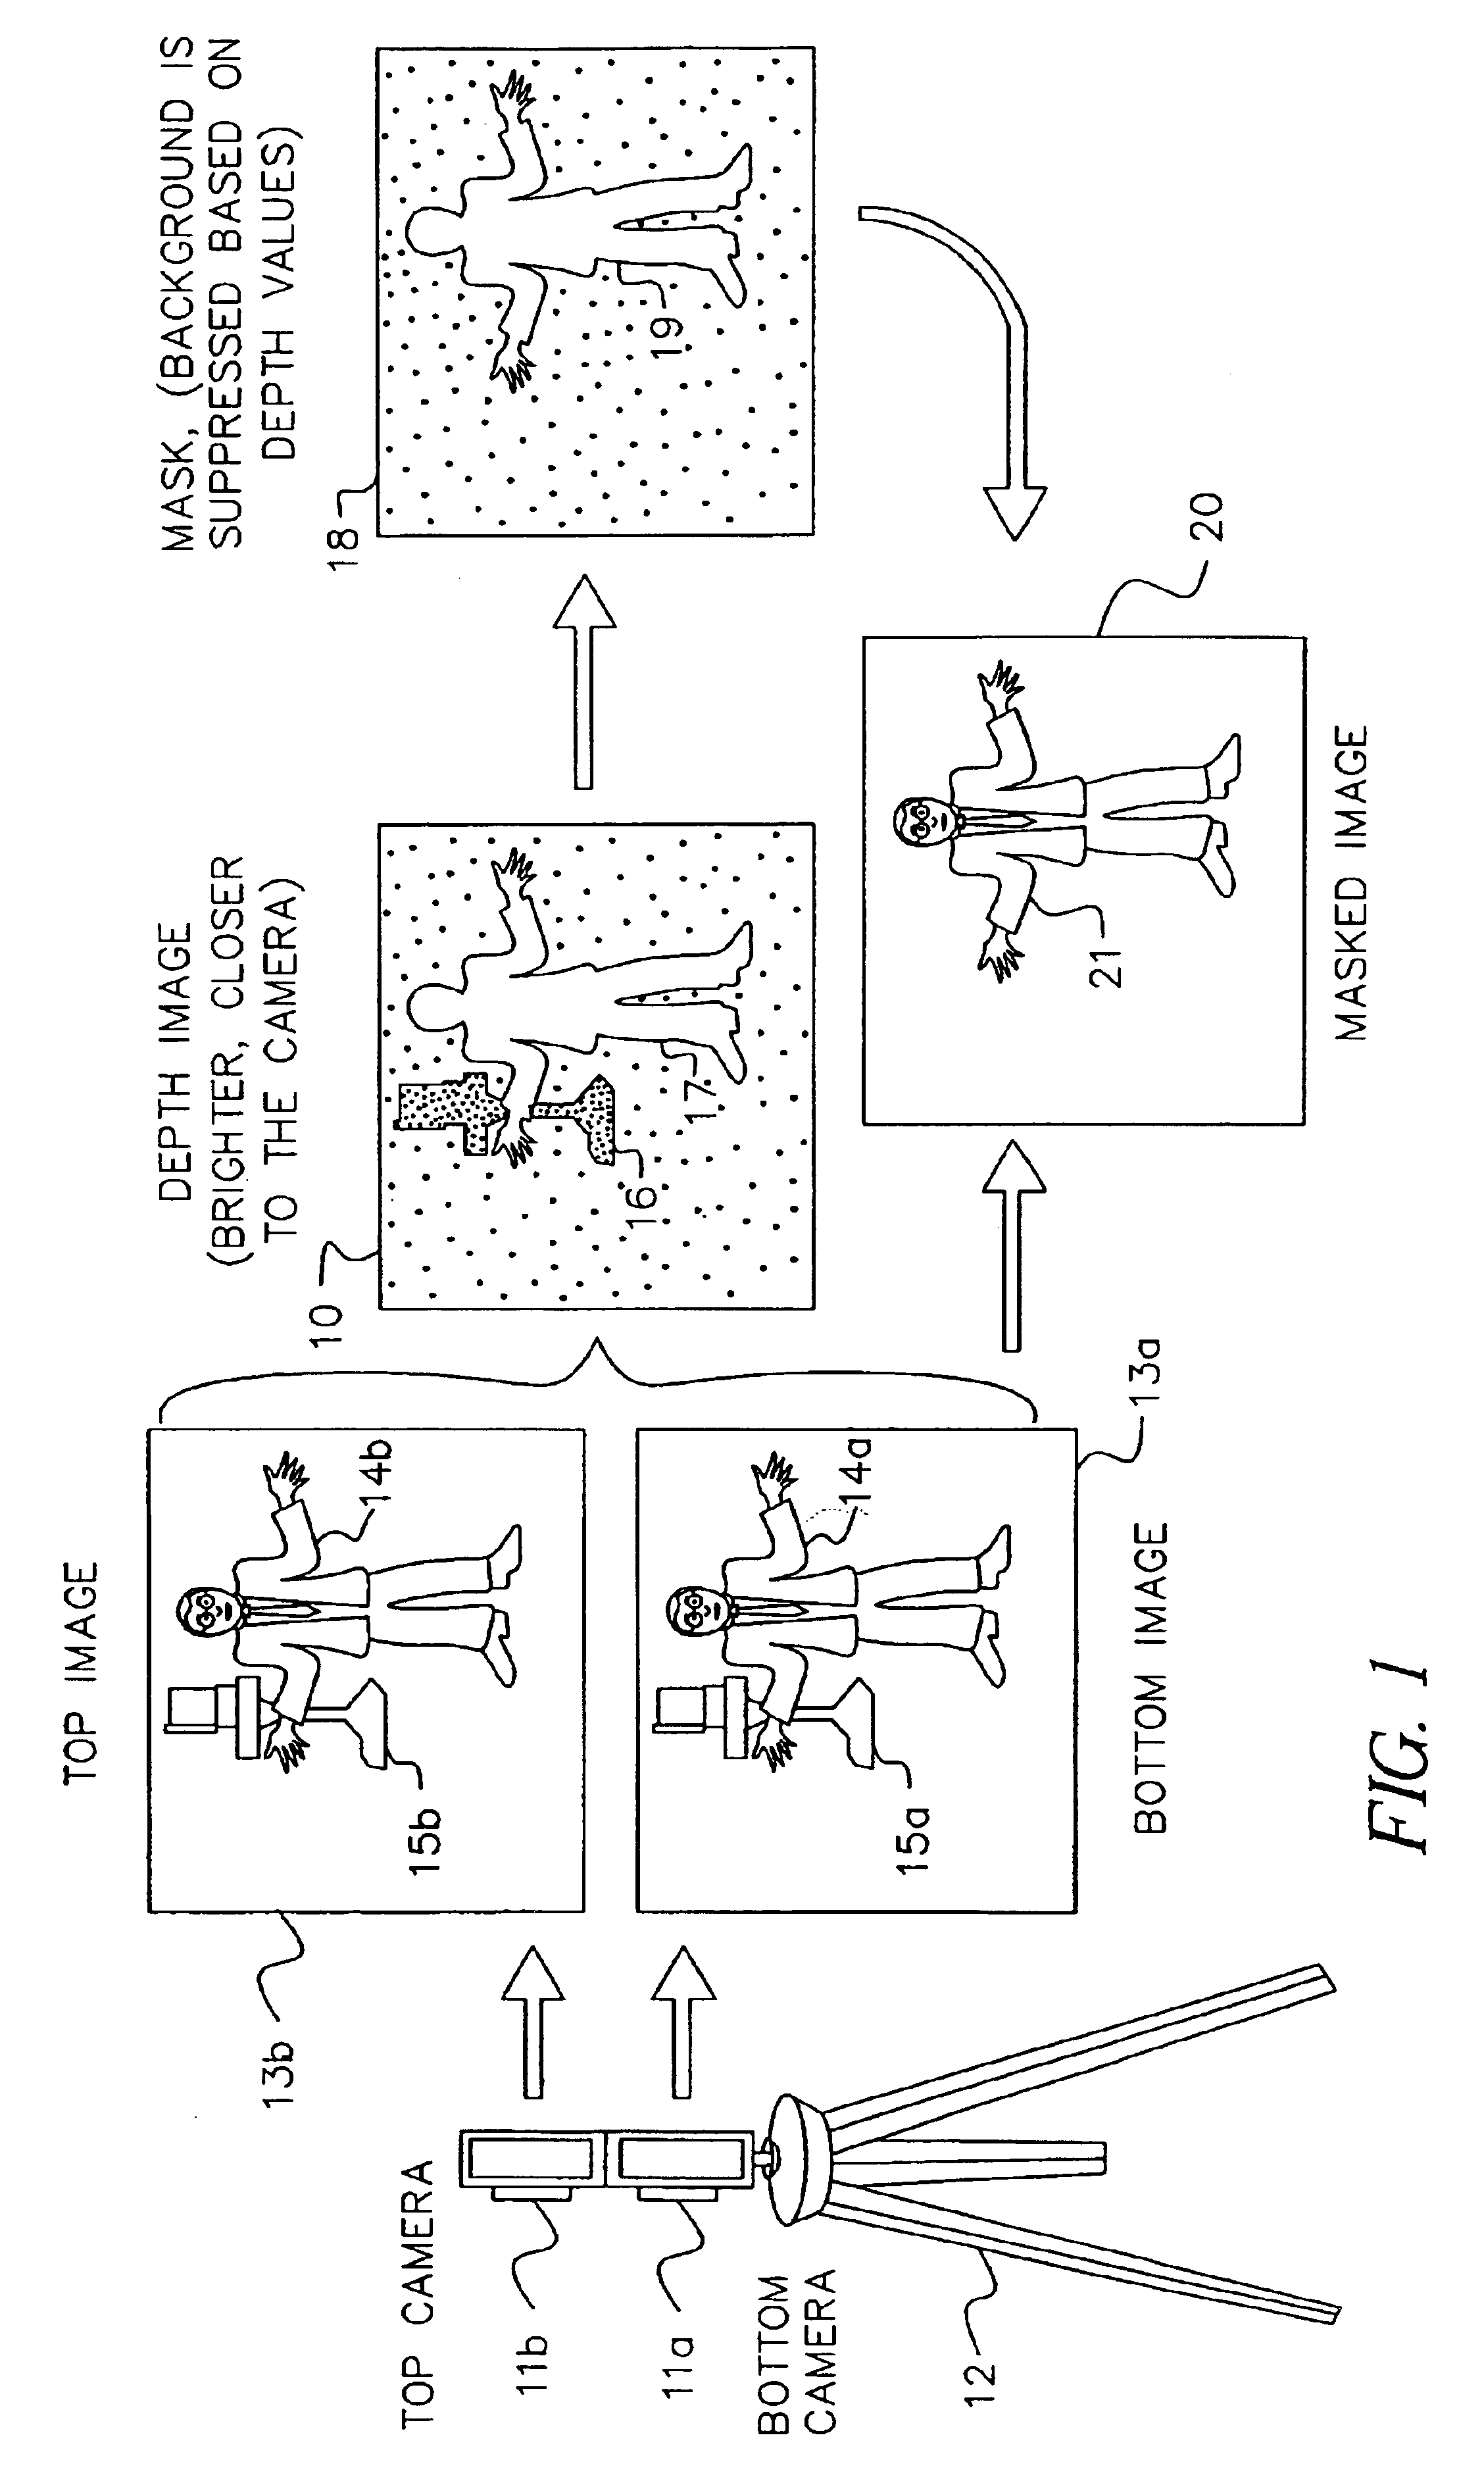 Method for forming a depth image from digital image data